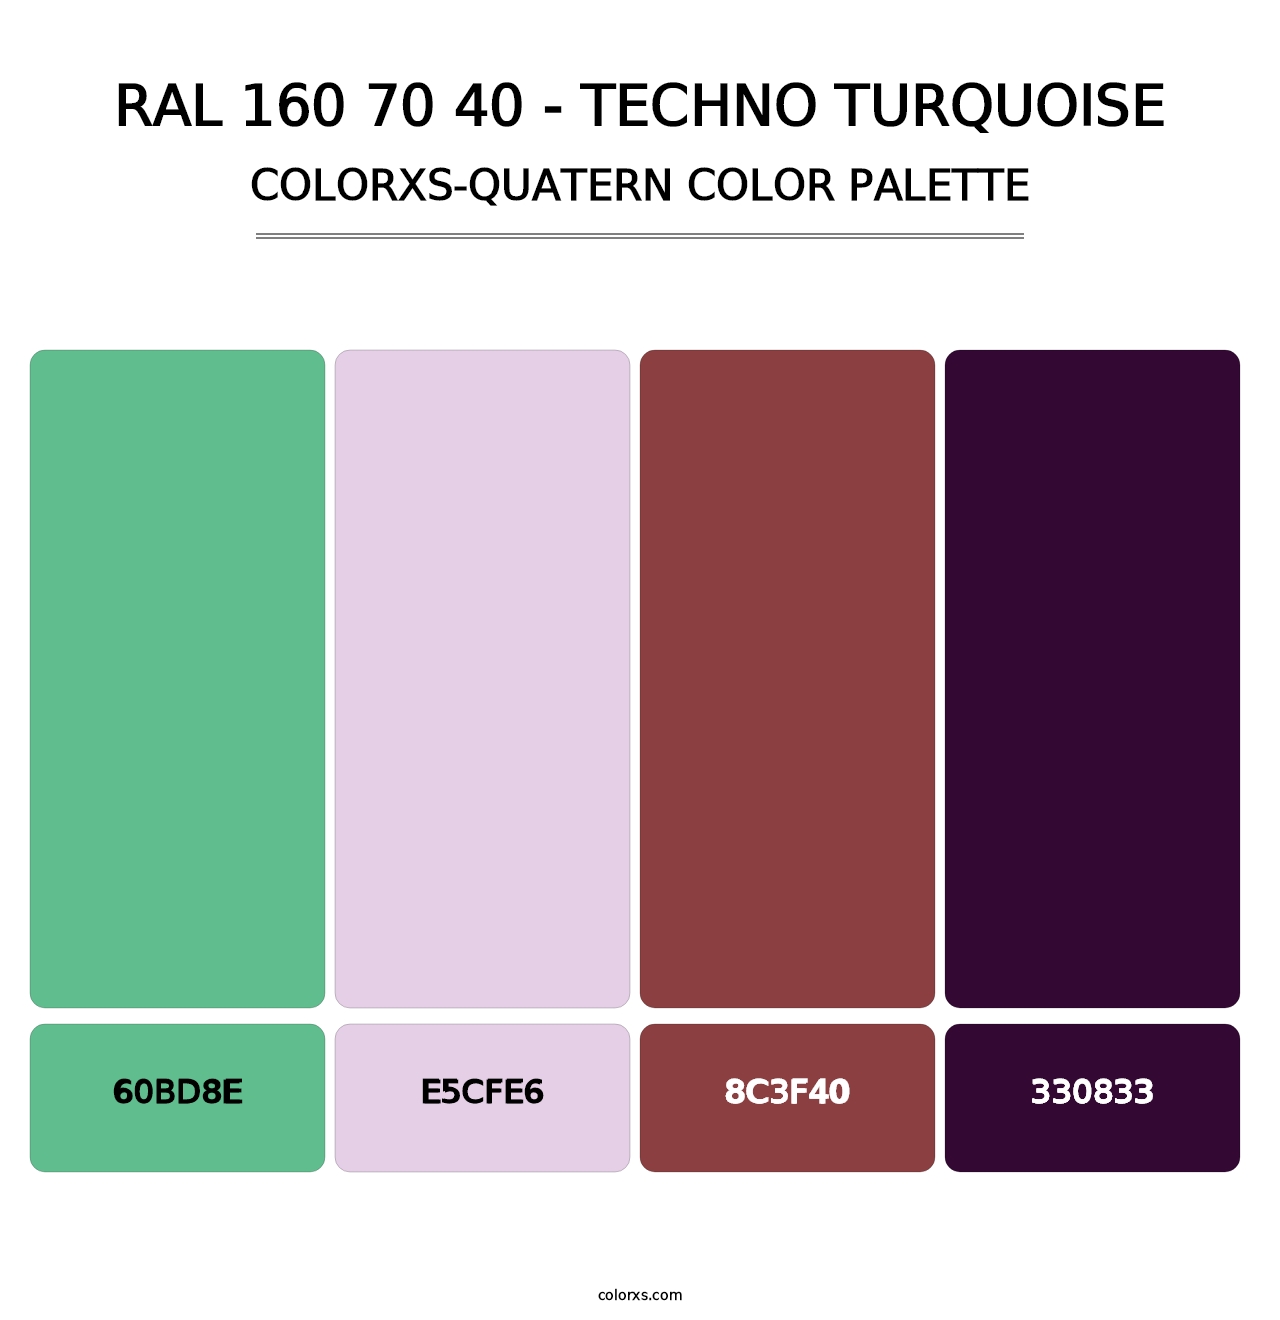 RAL 160 70 40 - Techno Turquoise - Colorxs Quatern Palette